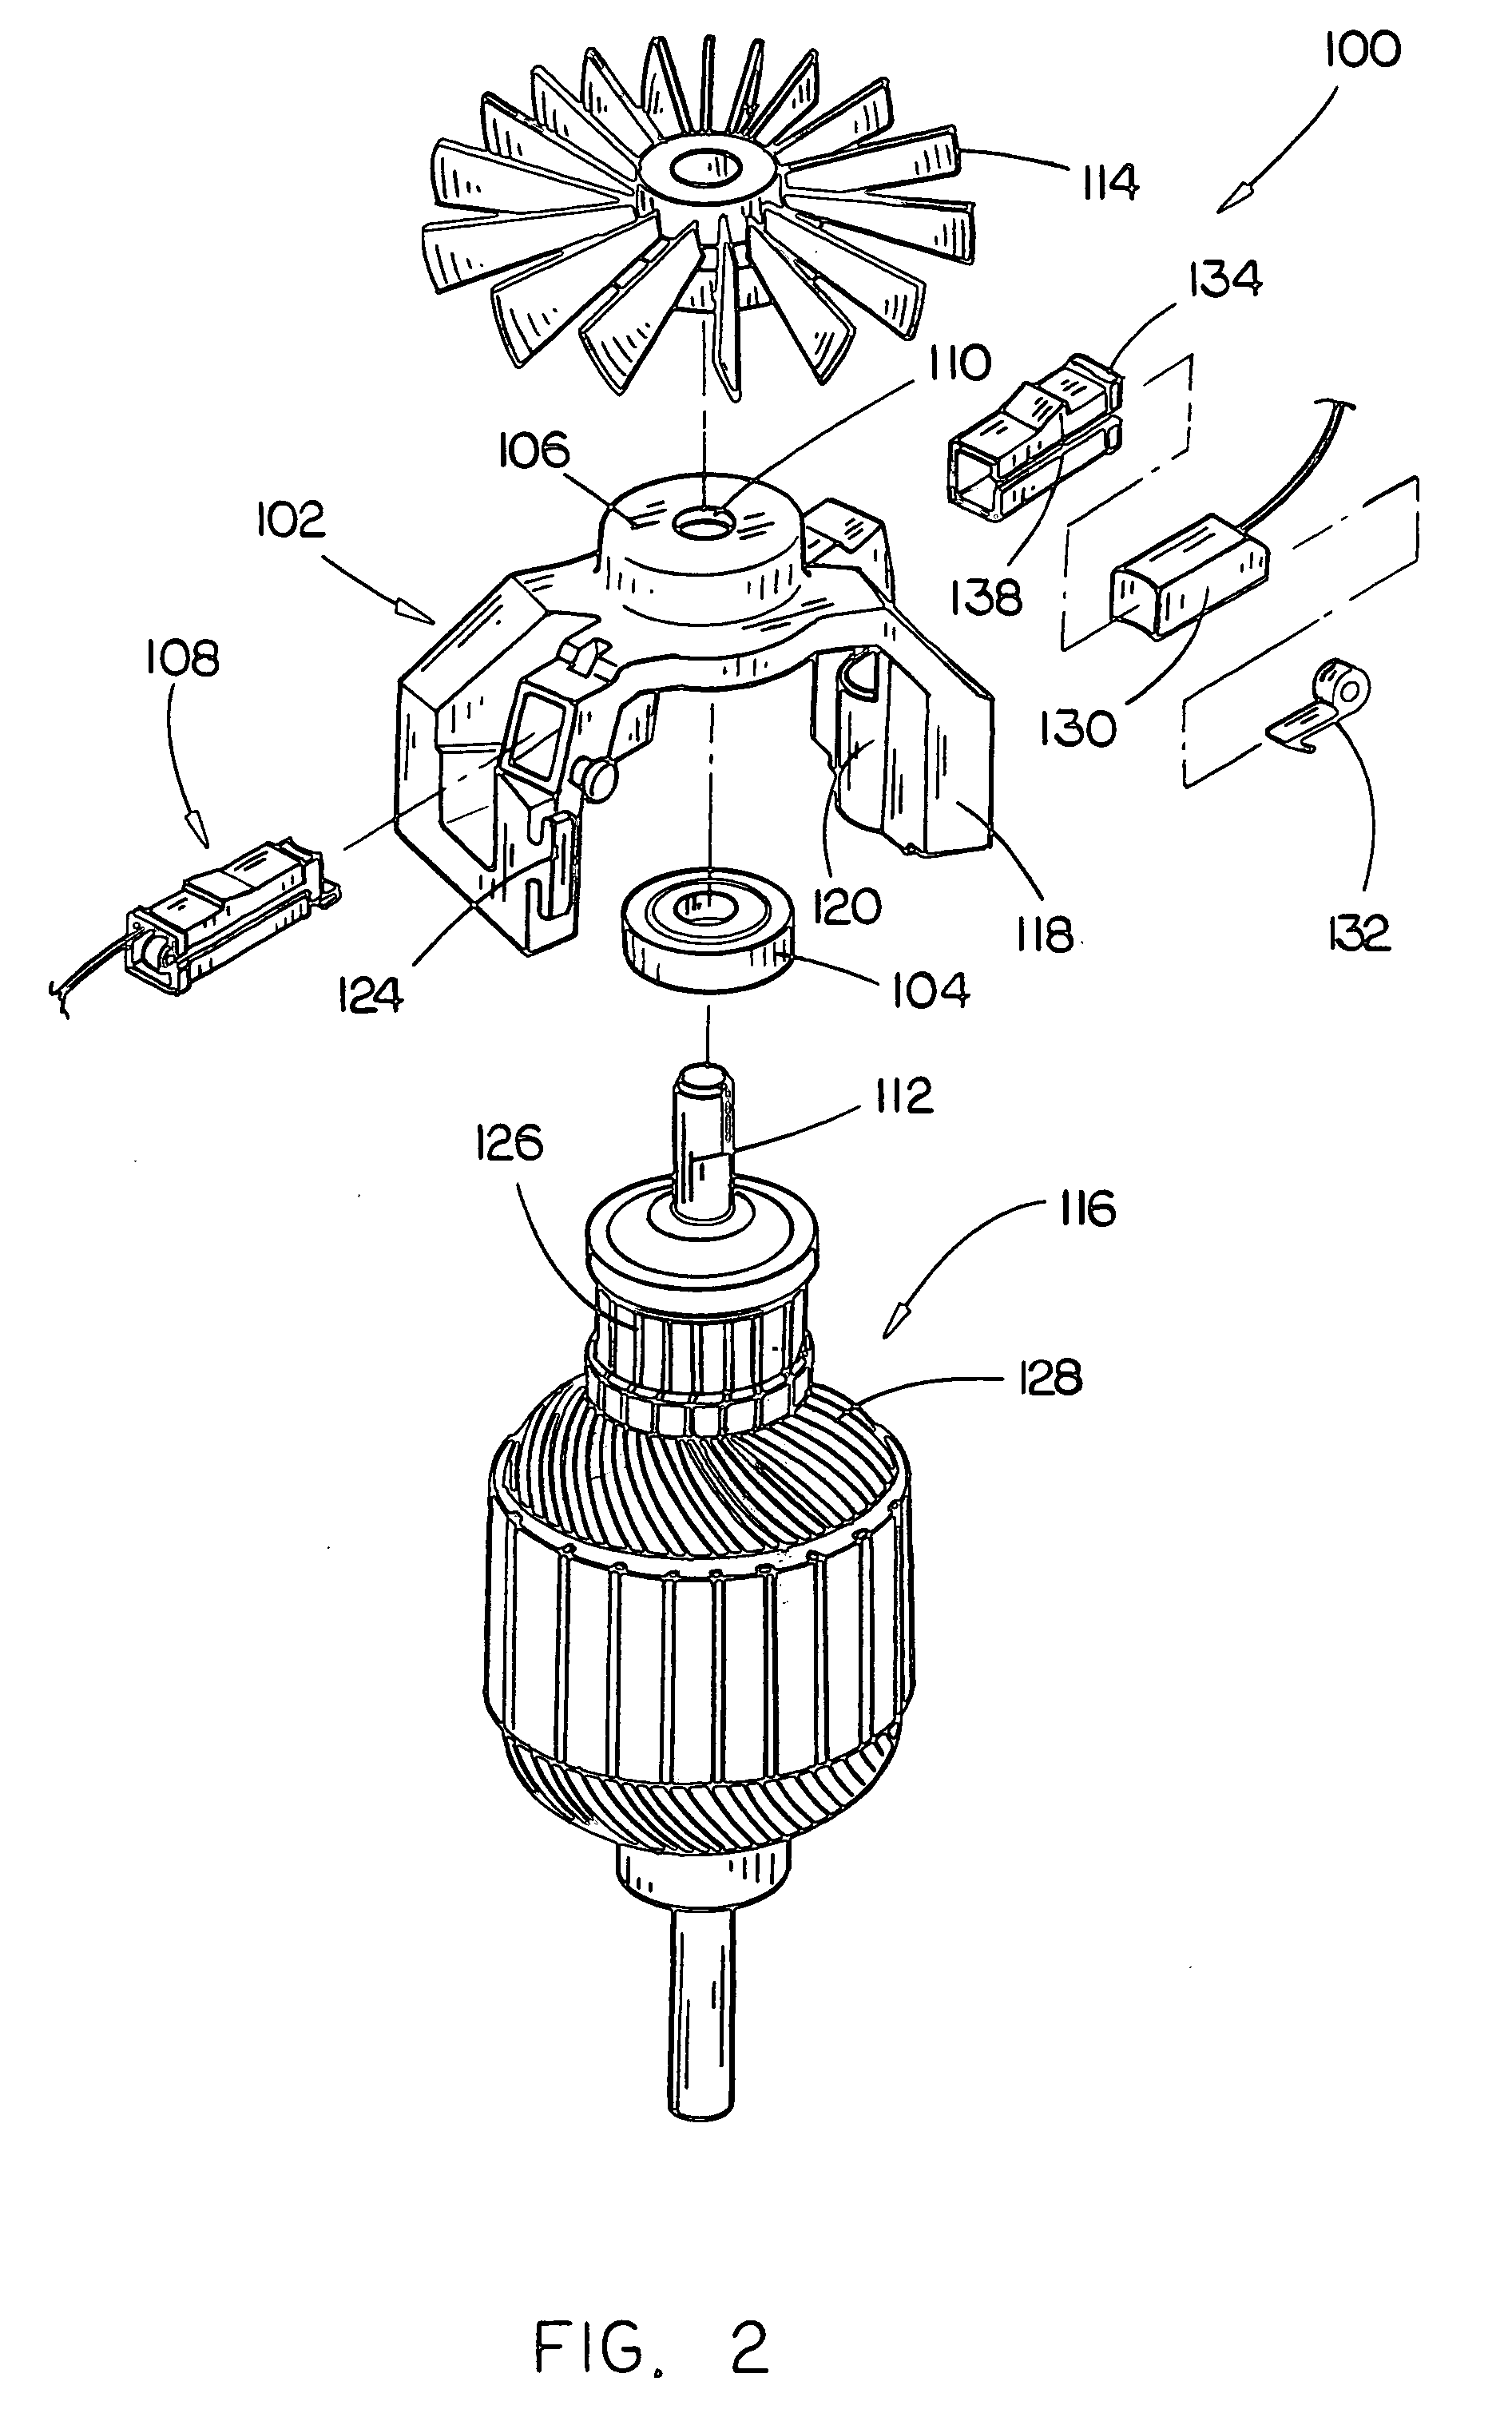 Bearing support for motors